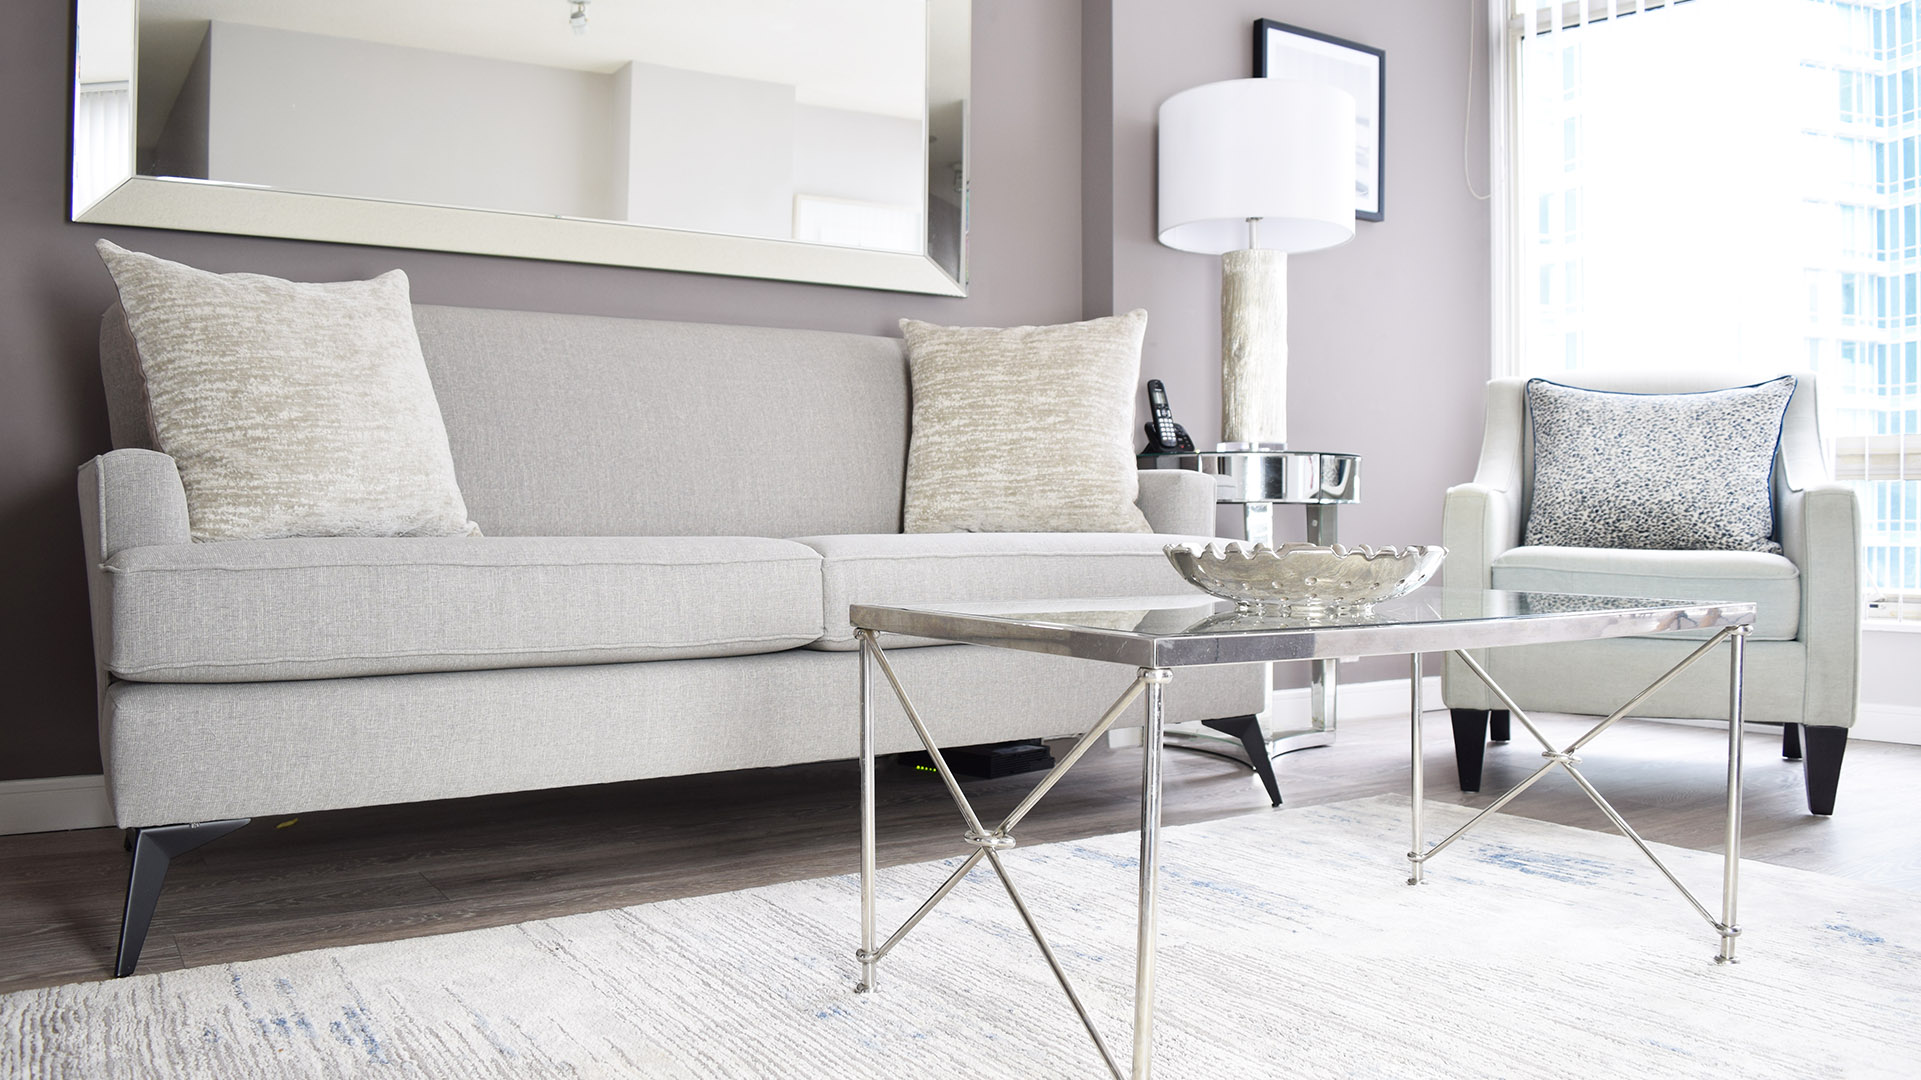 Grey sofa with accent pillows in the living room of apartment 1401-1288 Alberni St. at the Palisades.